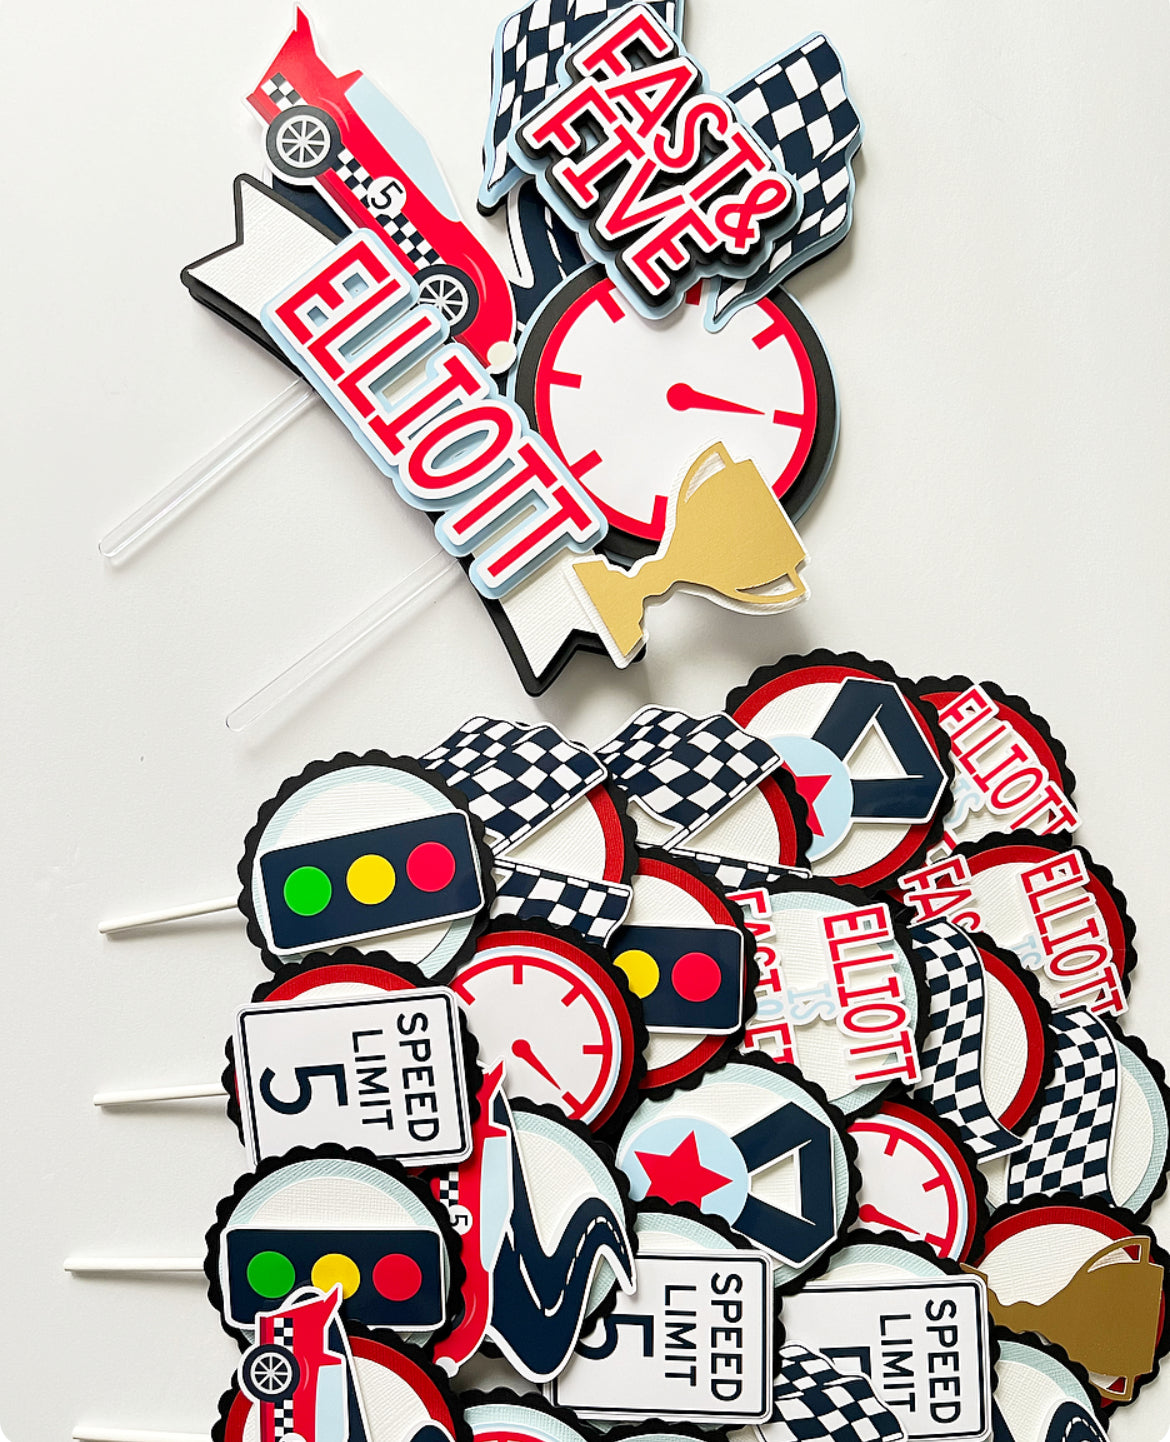 Race Car themed Party Decorations